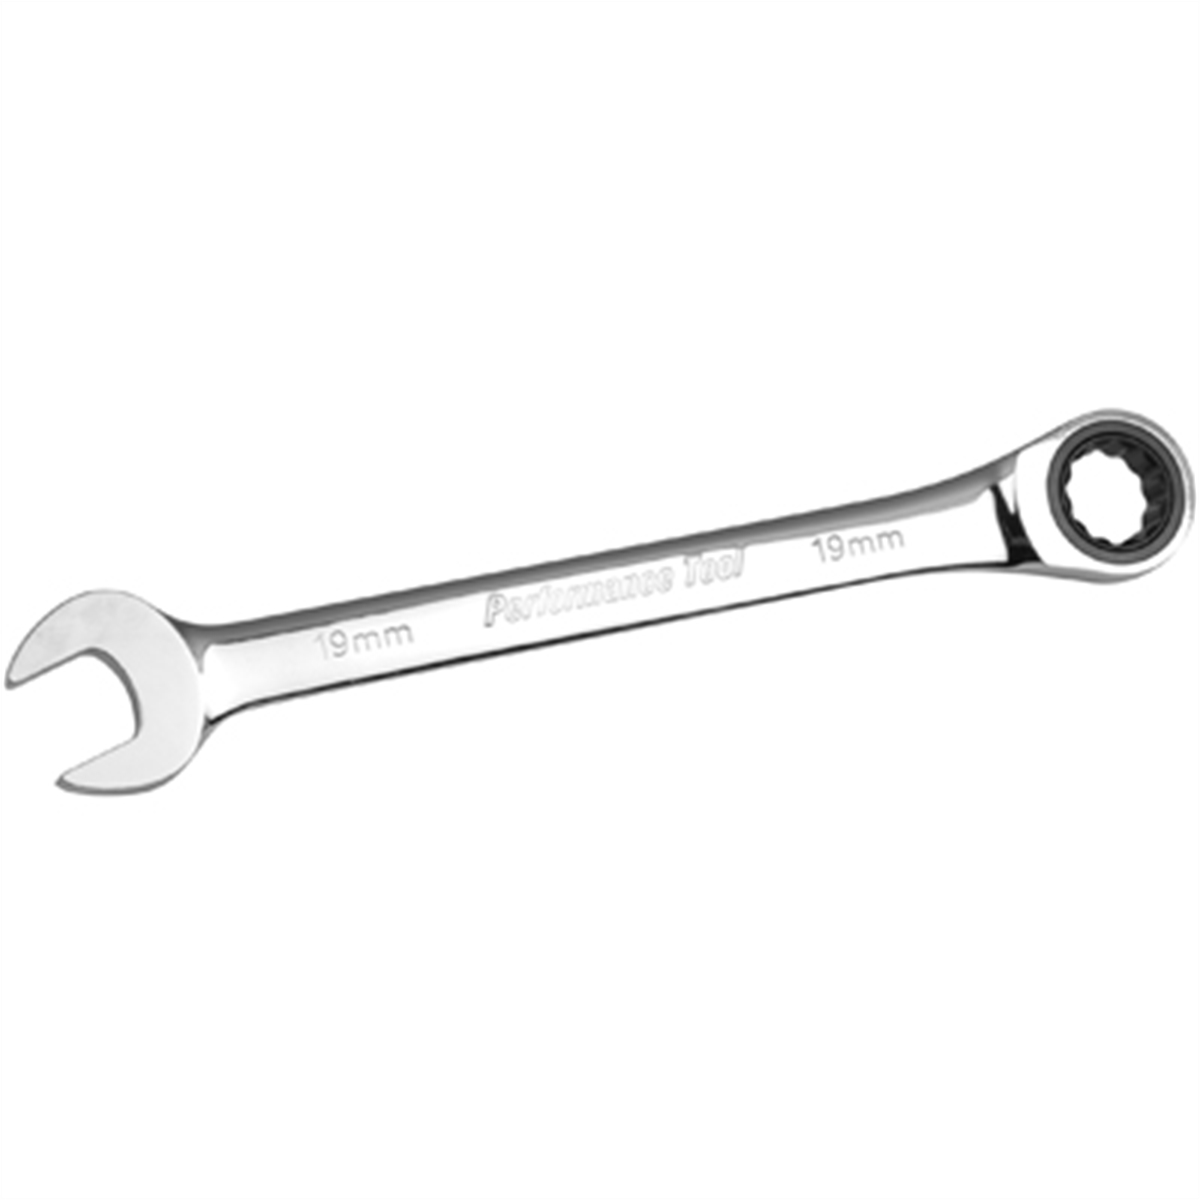 19mm Ratcheting Wrench